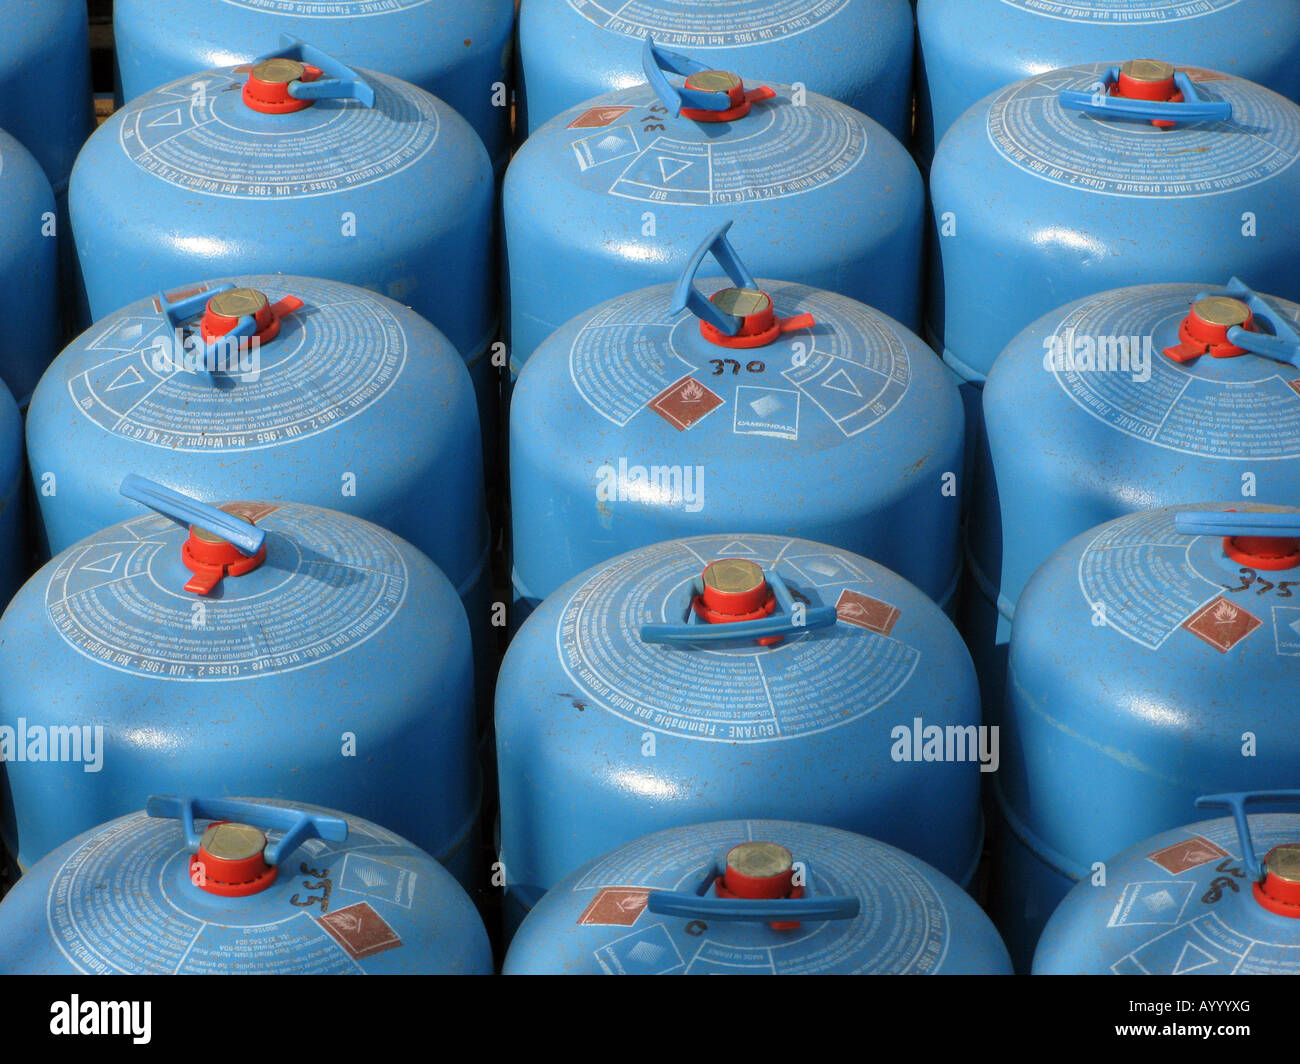 UK CALOR GAS BOTTLES IN A DEPOT IN TOWER HAMLETS LONDON ENGLAND Photo Julio Etchart Stock Photo